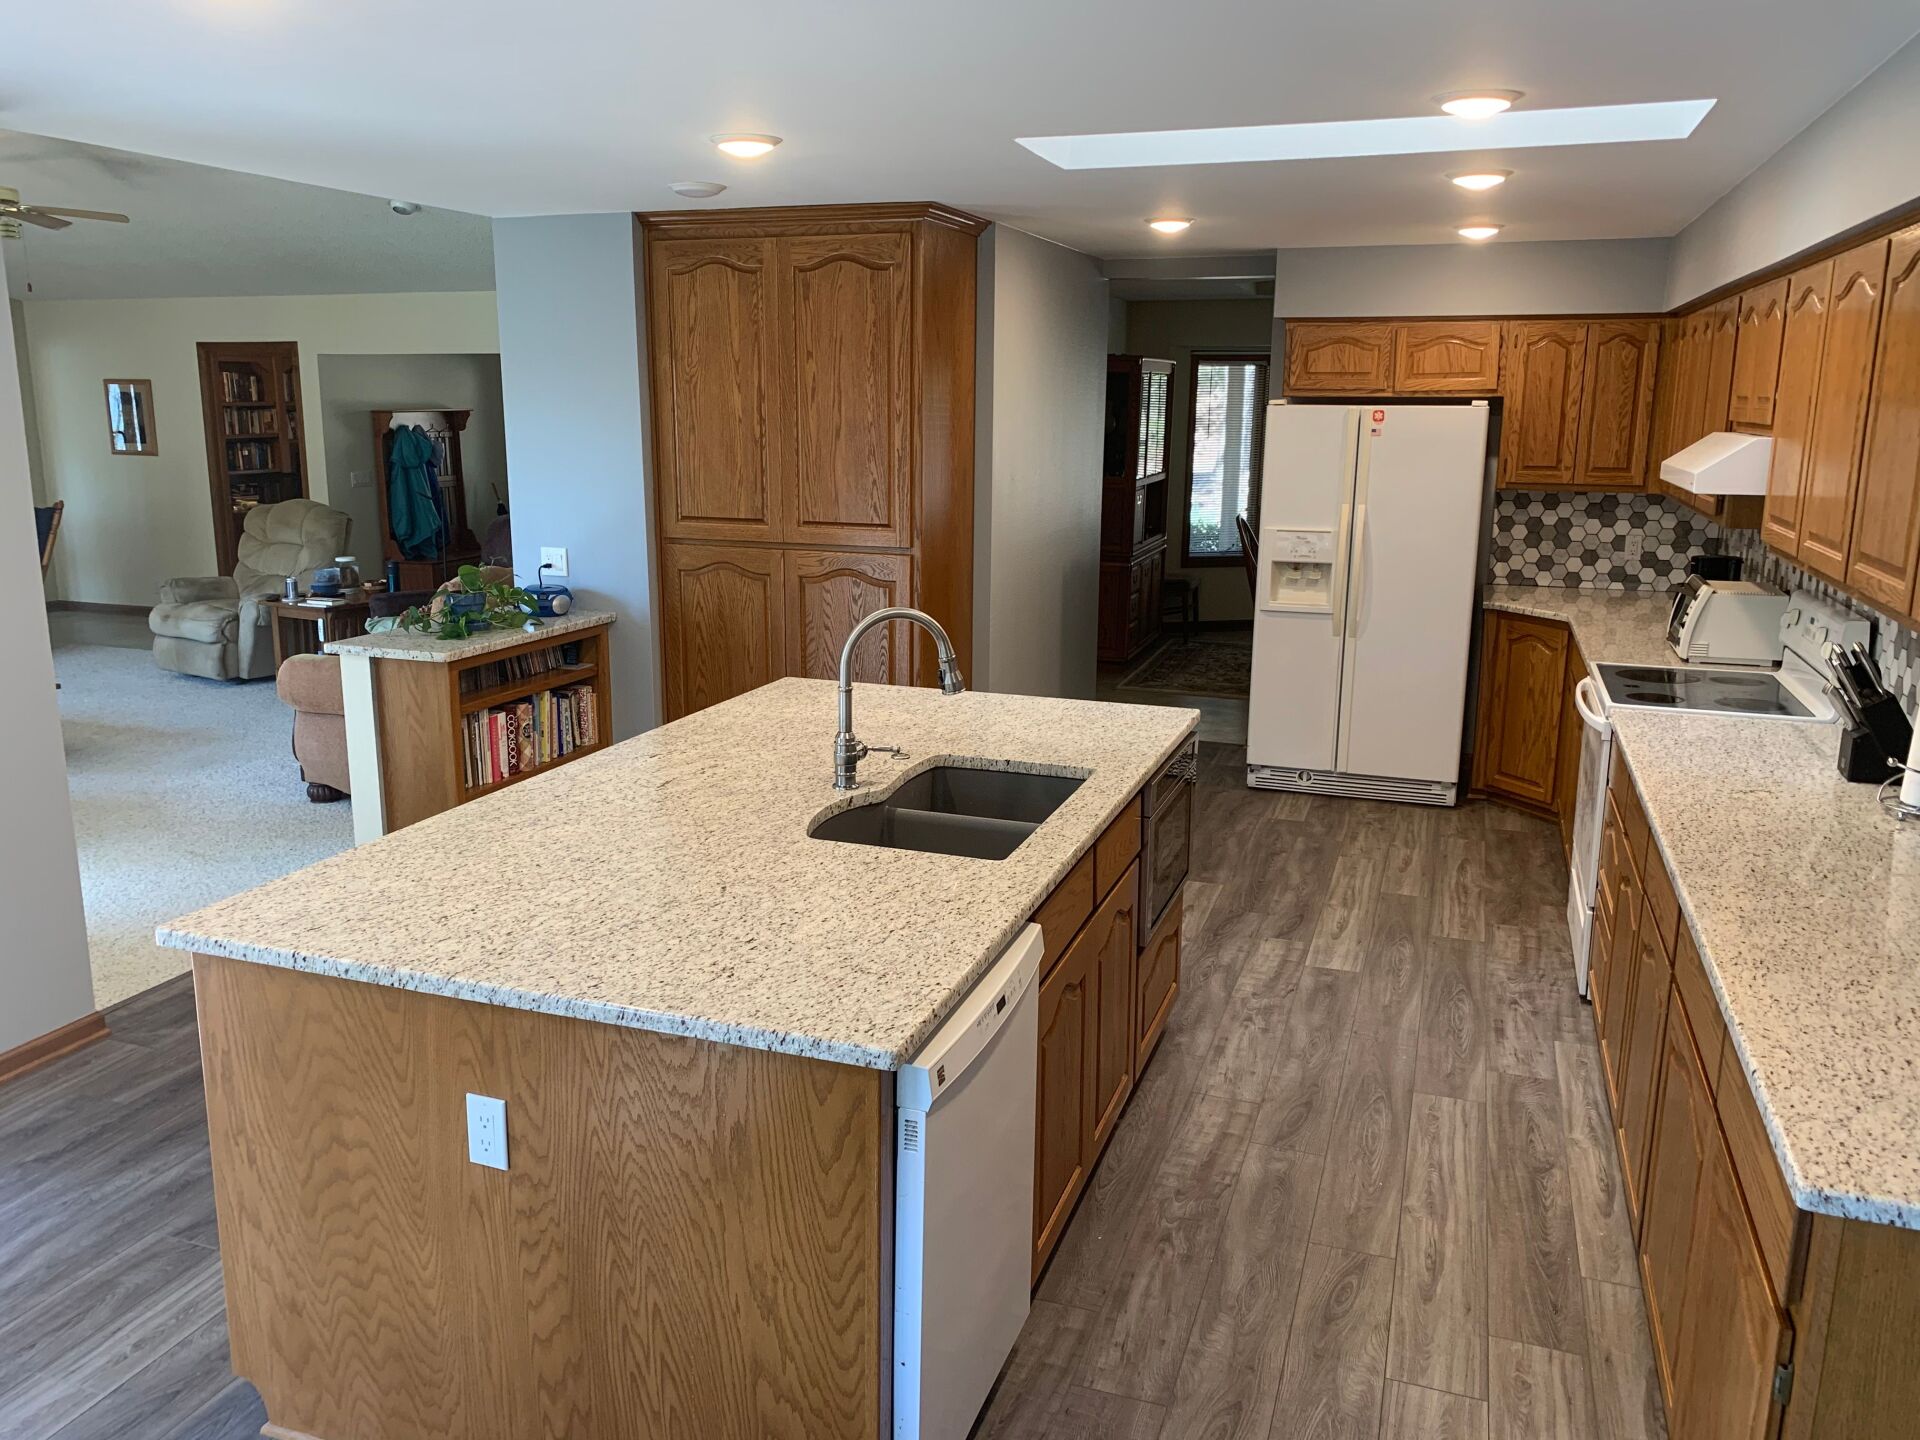 Hot Springs Village Kitchen Remodel with new cabinets and counter tops